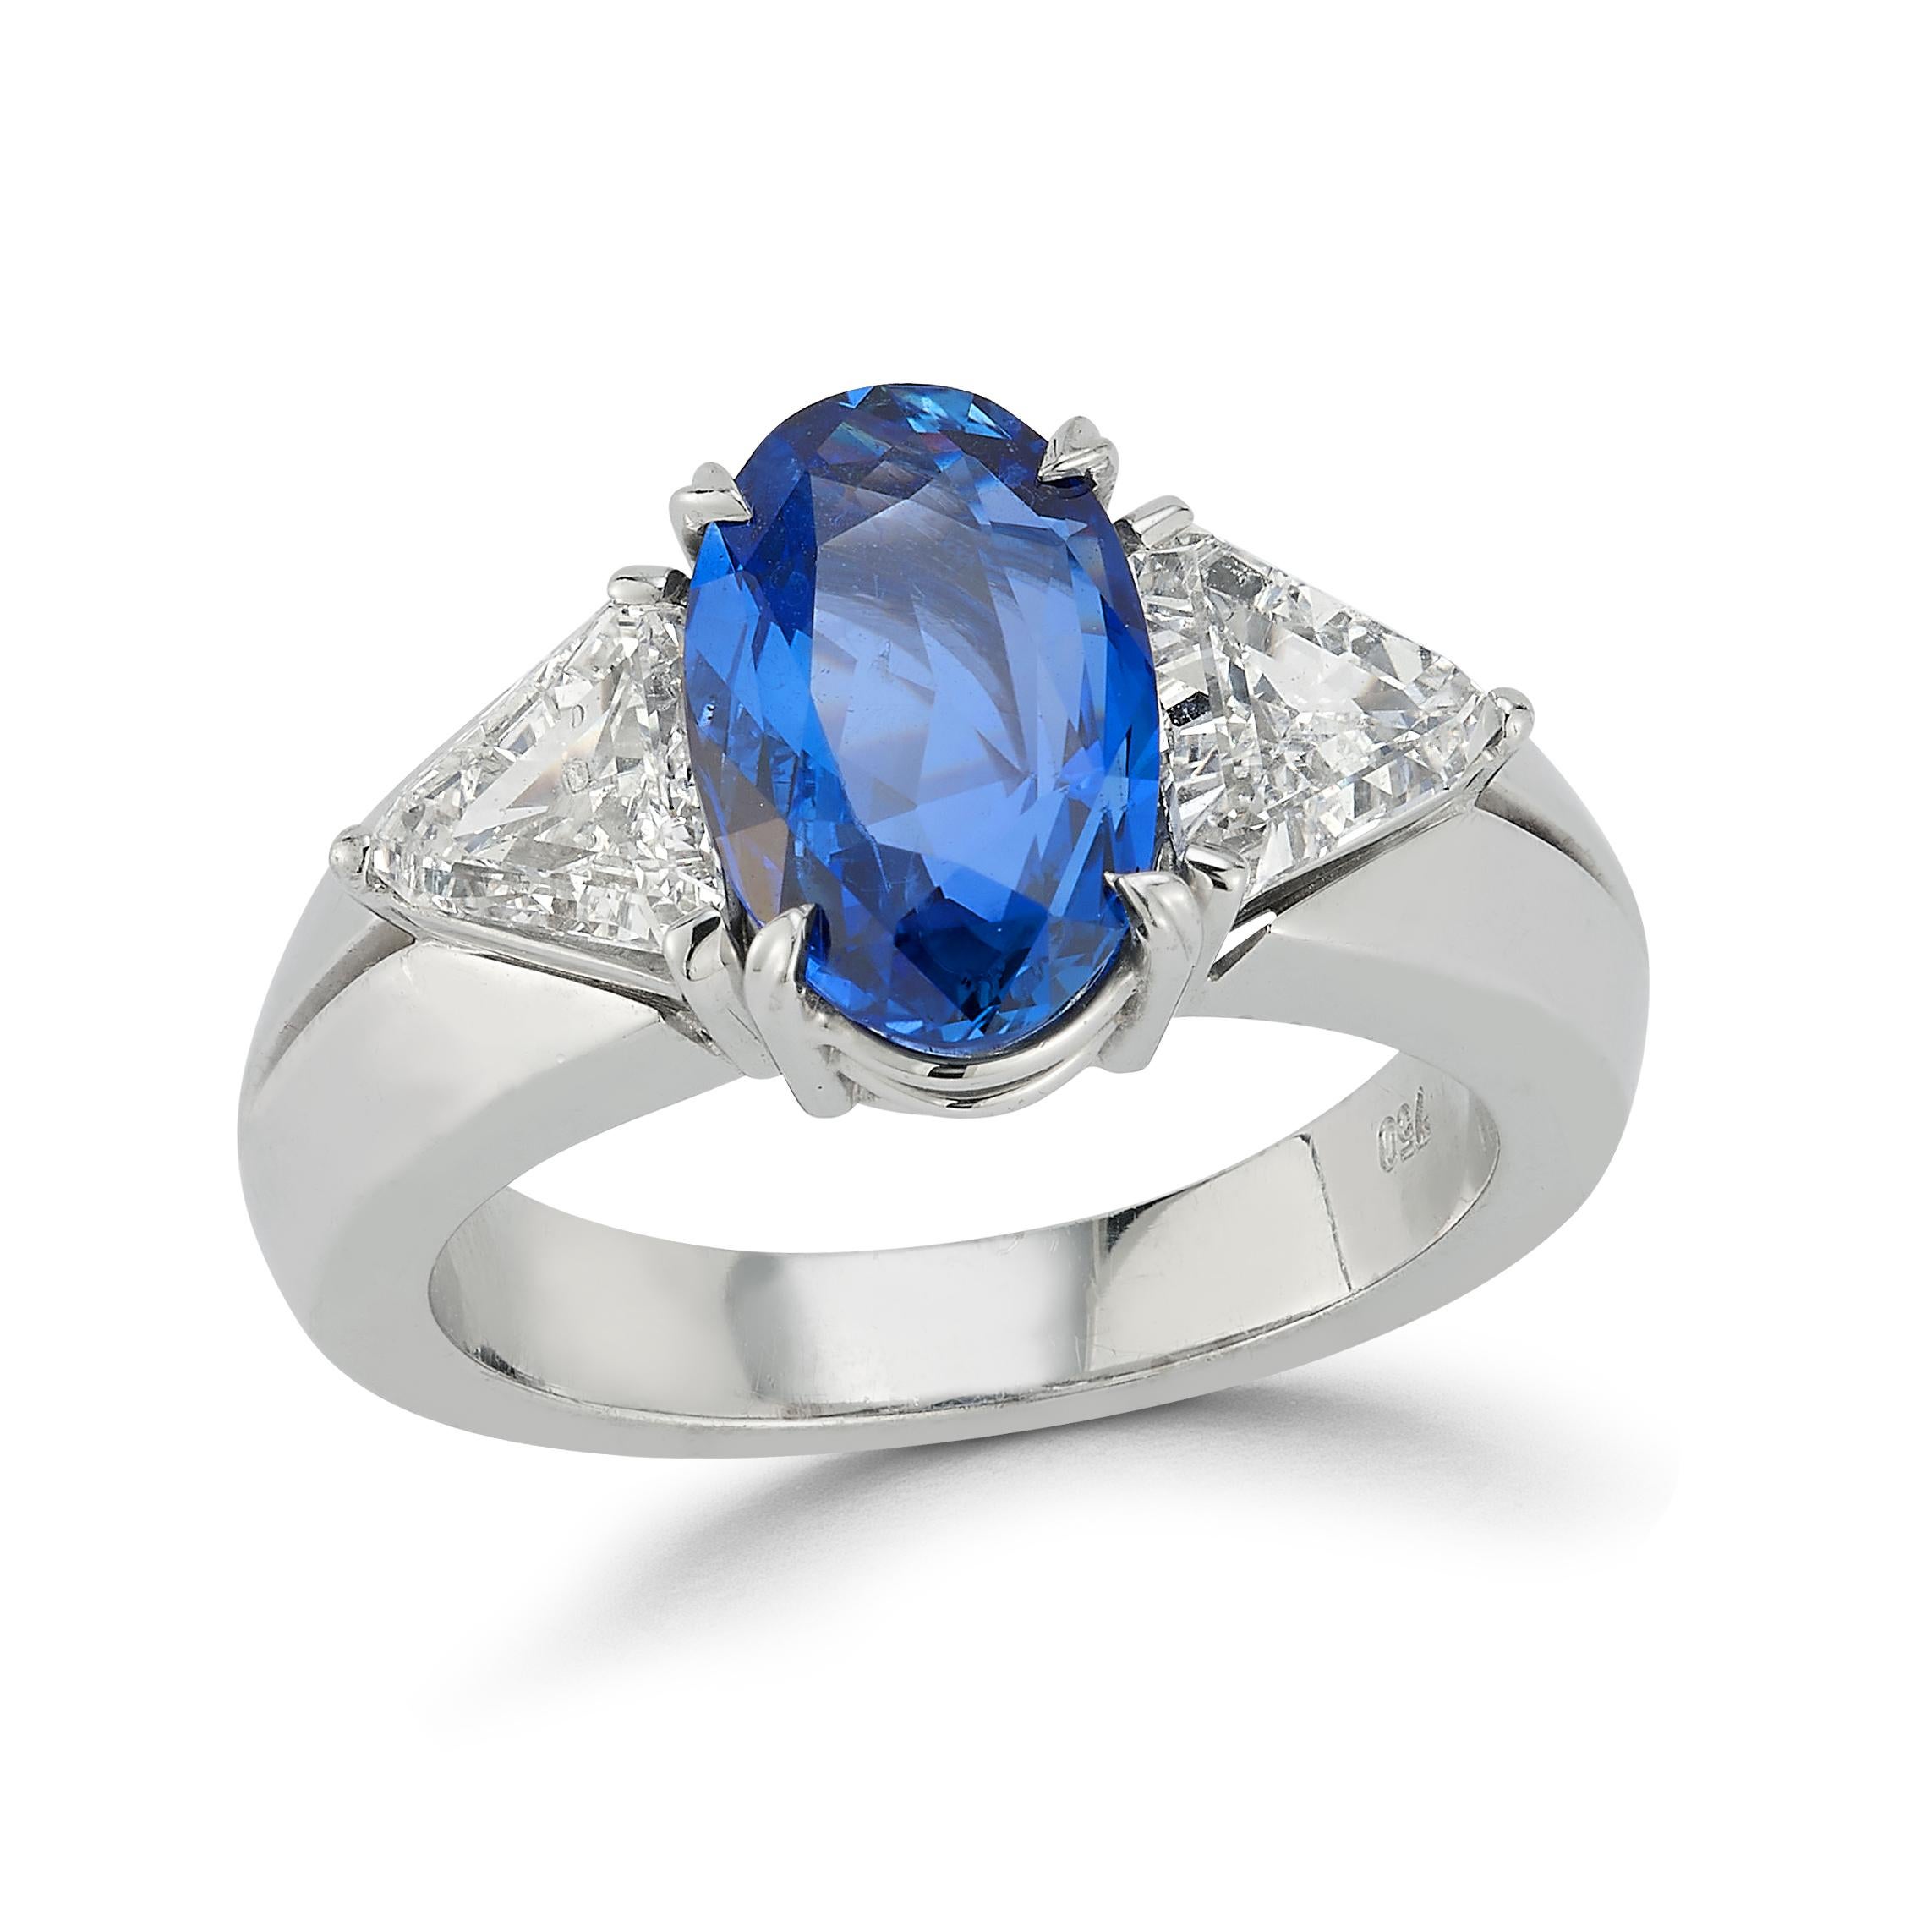 Unheated Sapphire & Diamond Three Stone Ring

An 18 karat white gold ring set with a natural modified oval cut sapphire flanked by 2 trillion cut diamonds
Approximate Sapphire Weight: 3.69 carats
Approximate Total Diamond Weight: 1.2